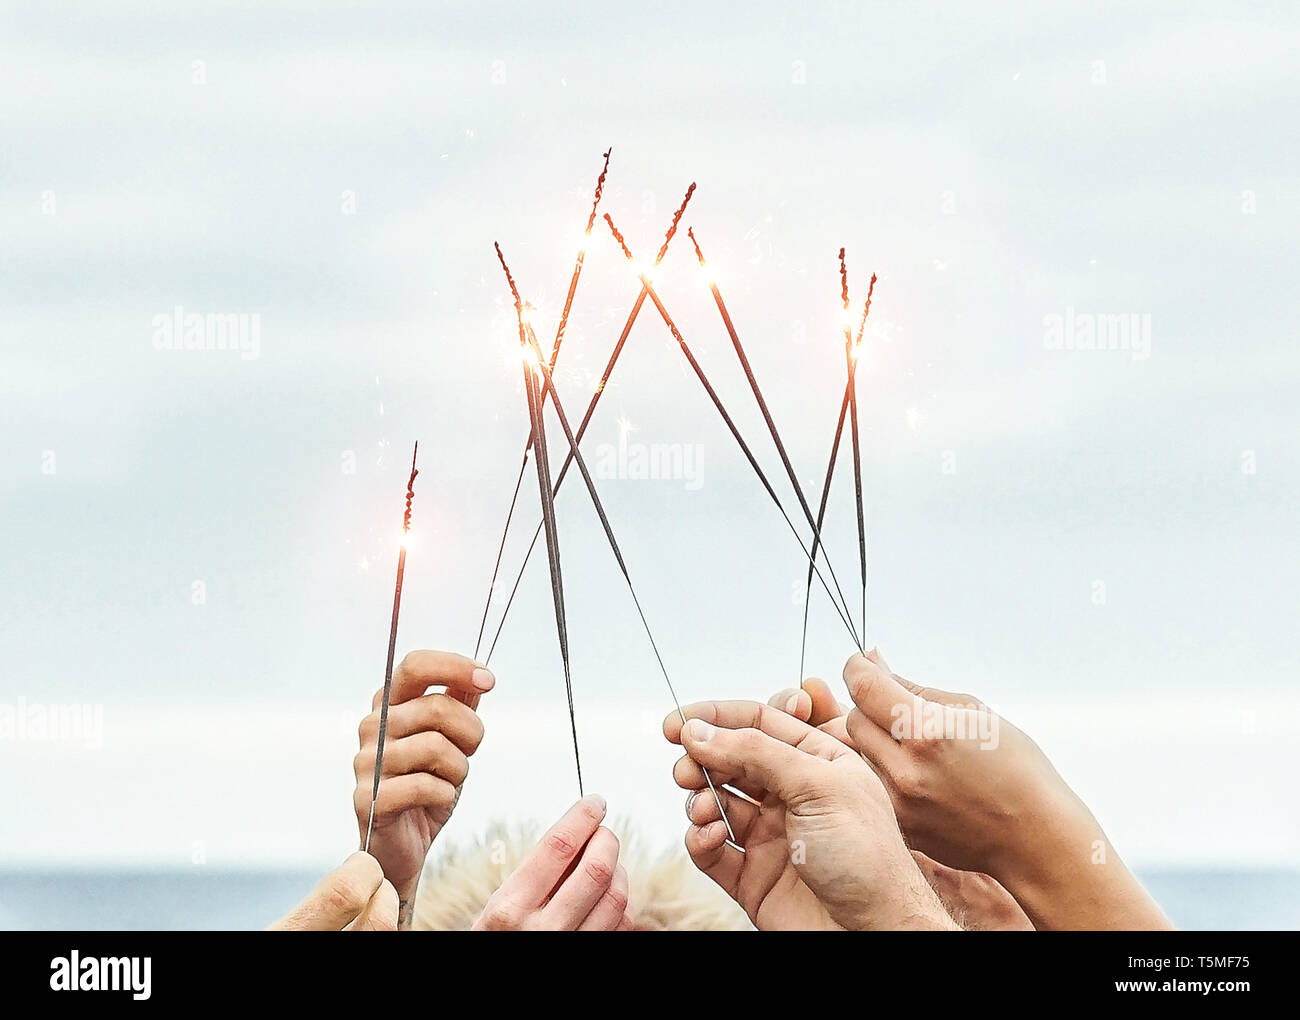 Close up hands of group of happy friends having fun celebrating with sparklers fireworks outdoor - Youth, celebrate, party lifestyle concept Stock Photo